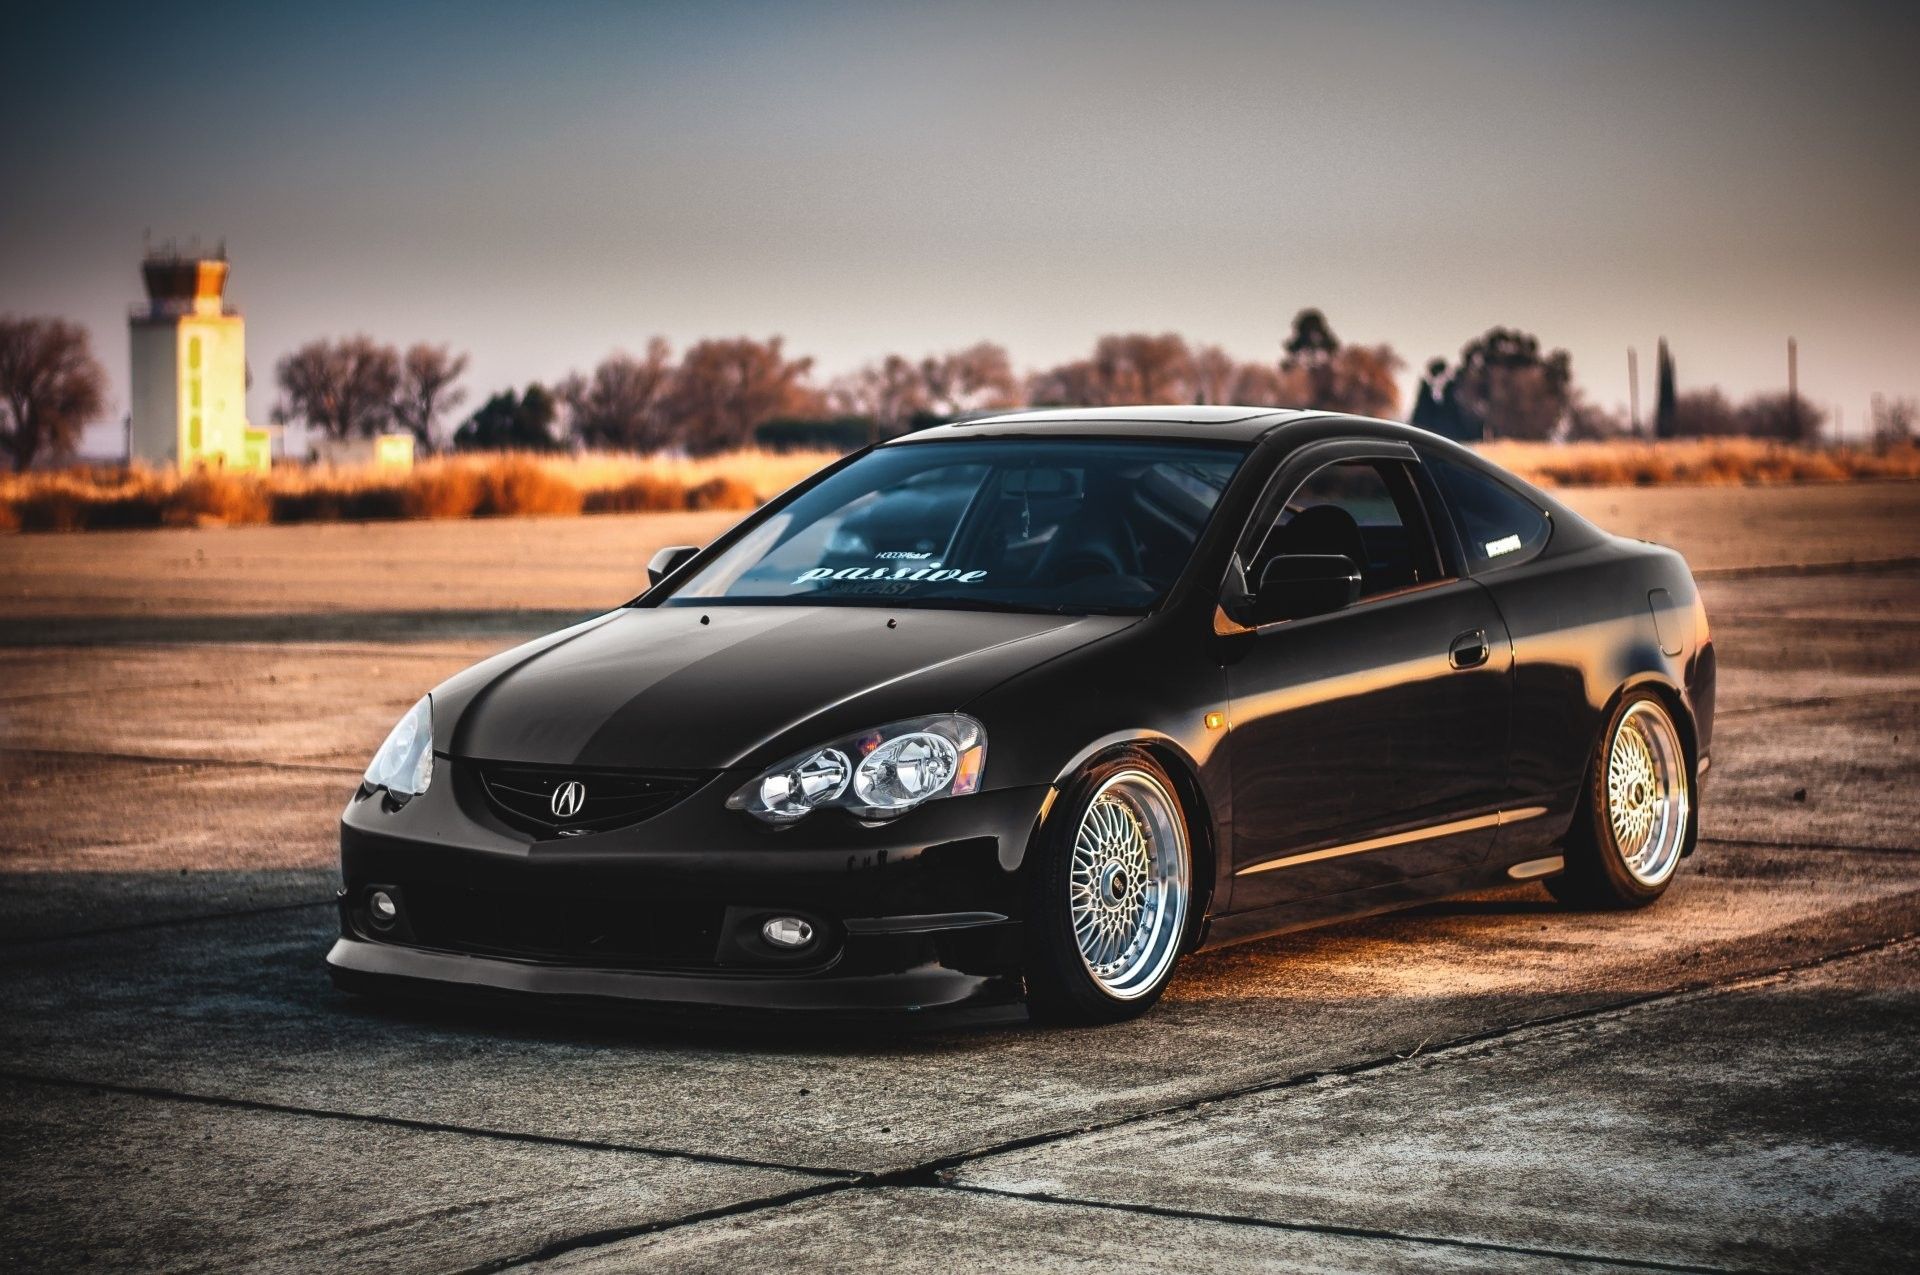 Acura RSX Wallpaper Free Acura RSX Background